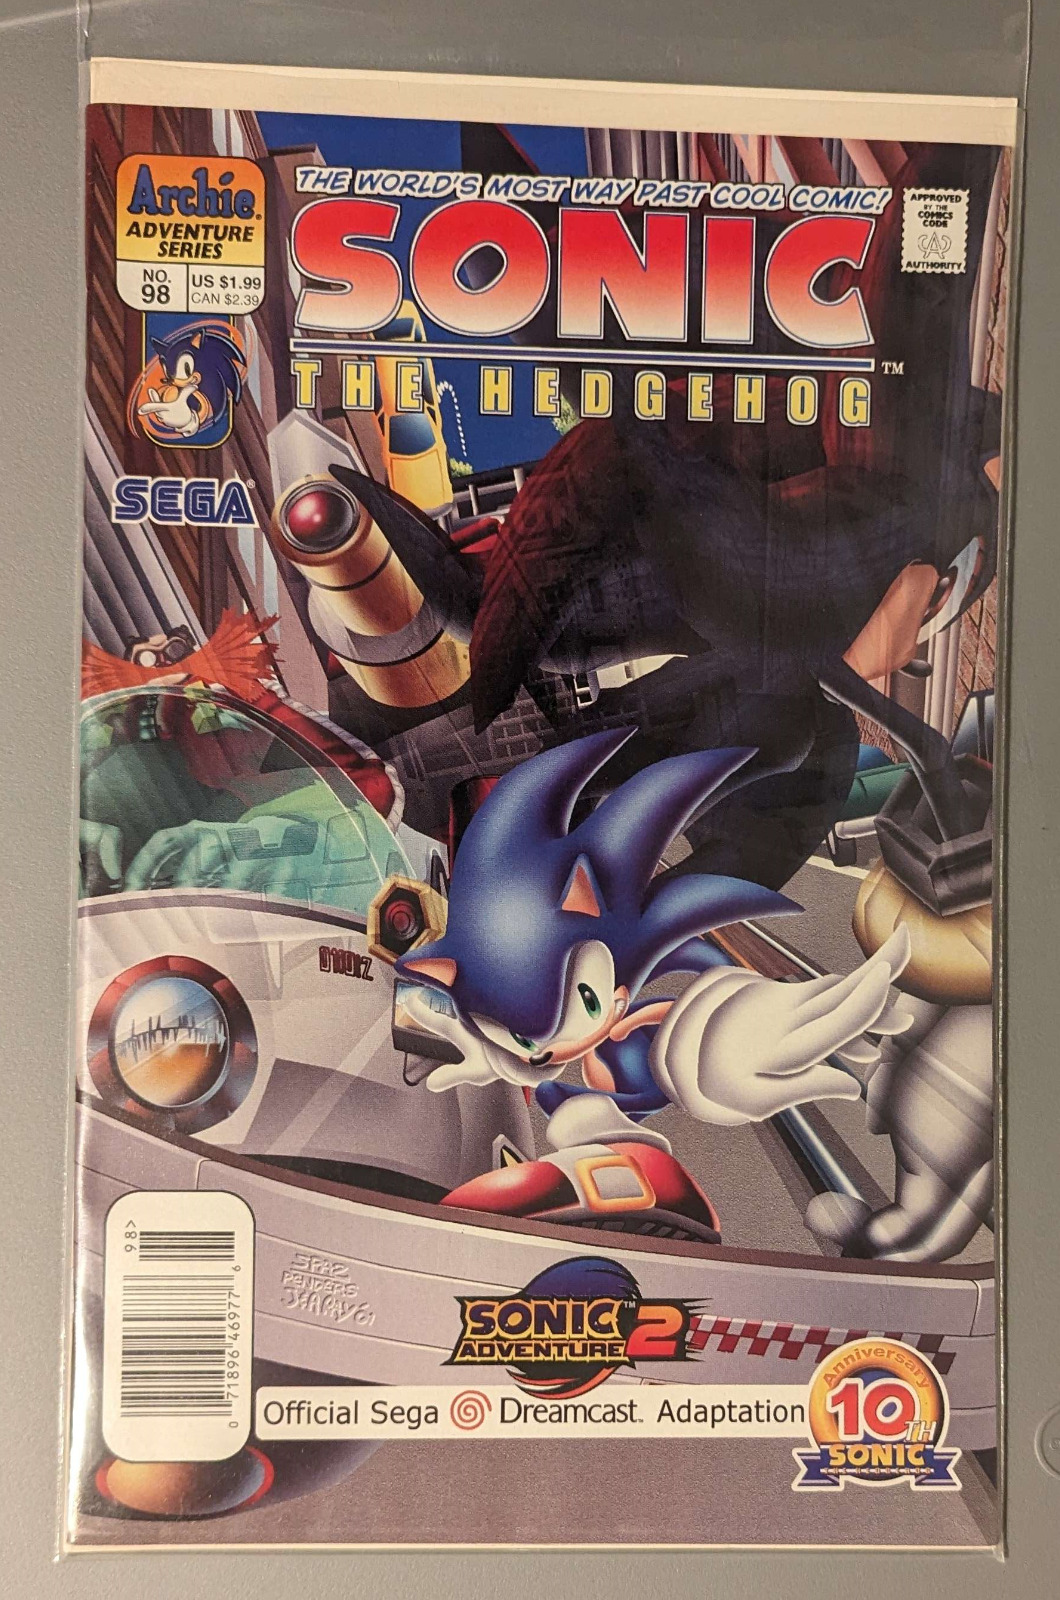 Sonic The Hedgehog Issue #98, 1st Shadow Appearance, Archie Comics VF 2001